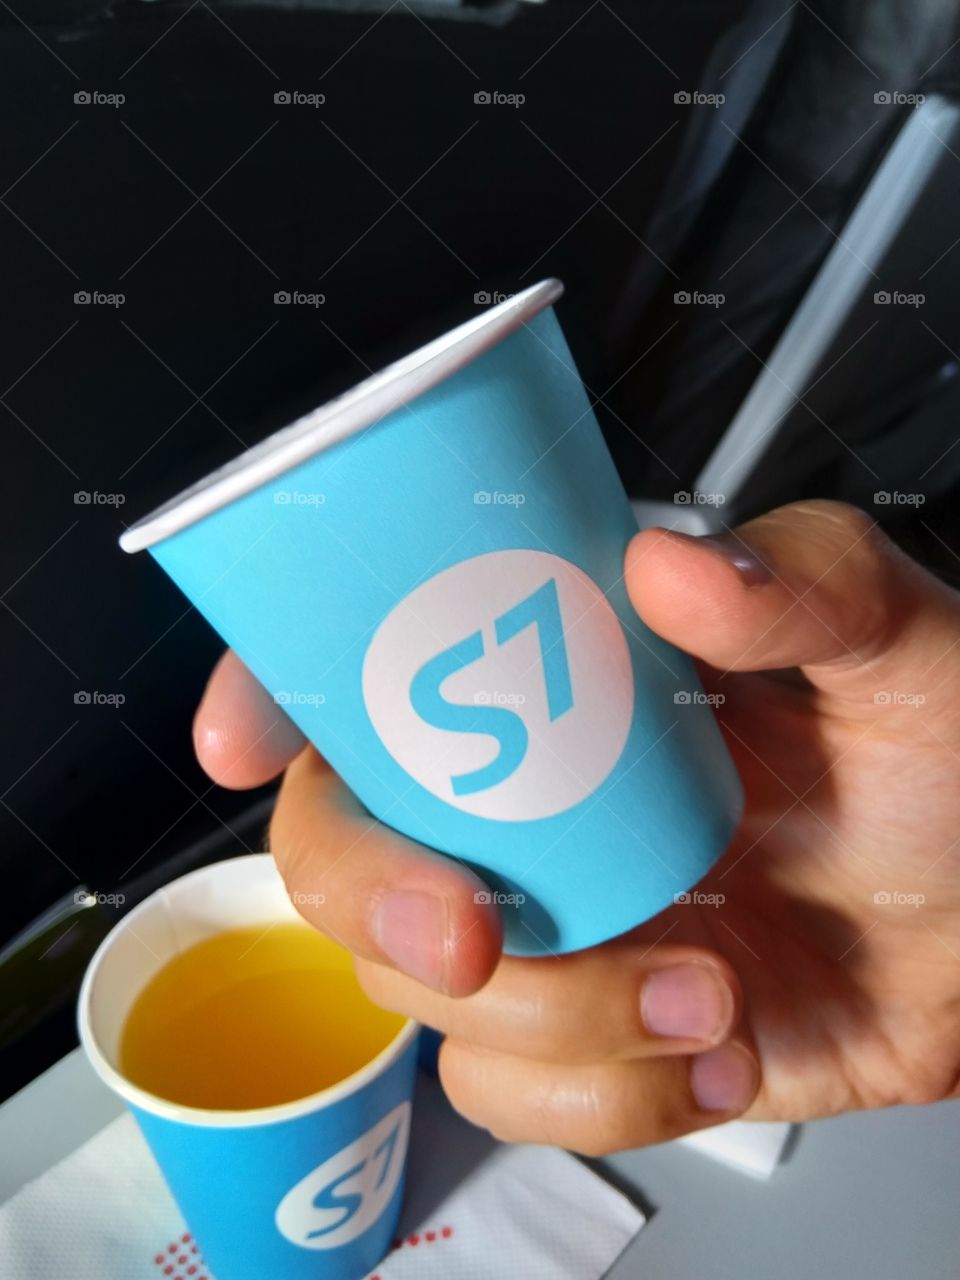 Paper Cup of juice on the plane